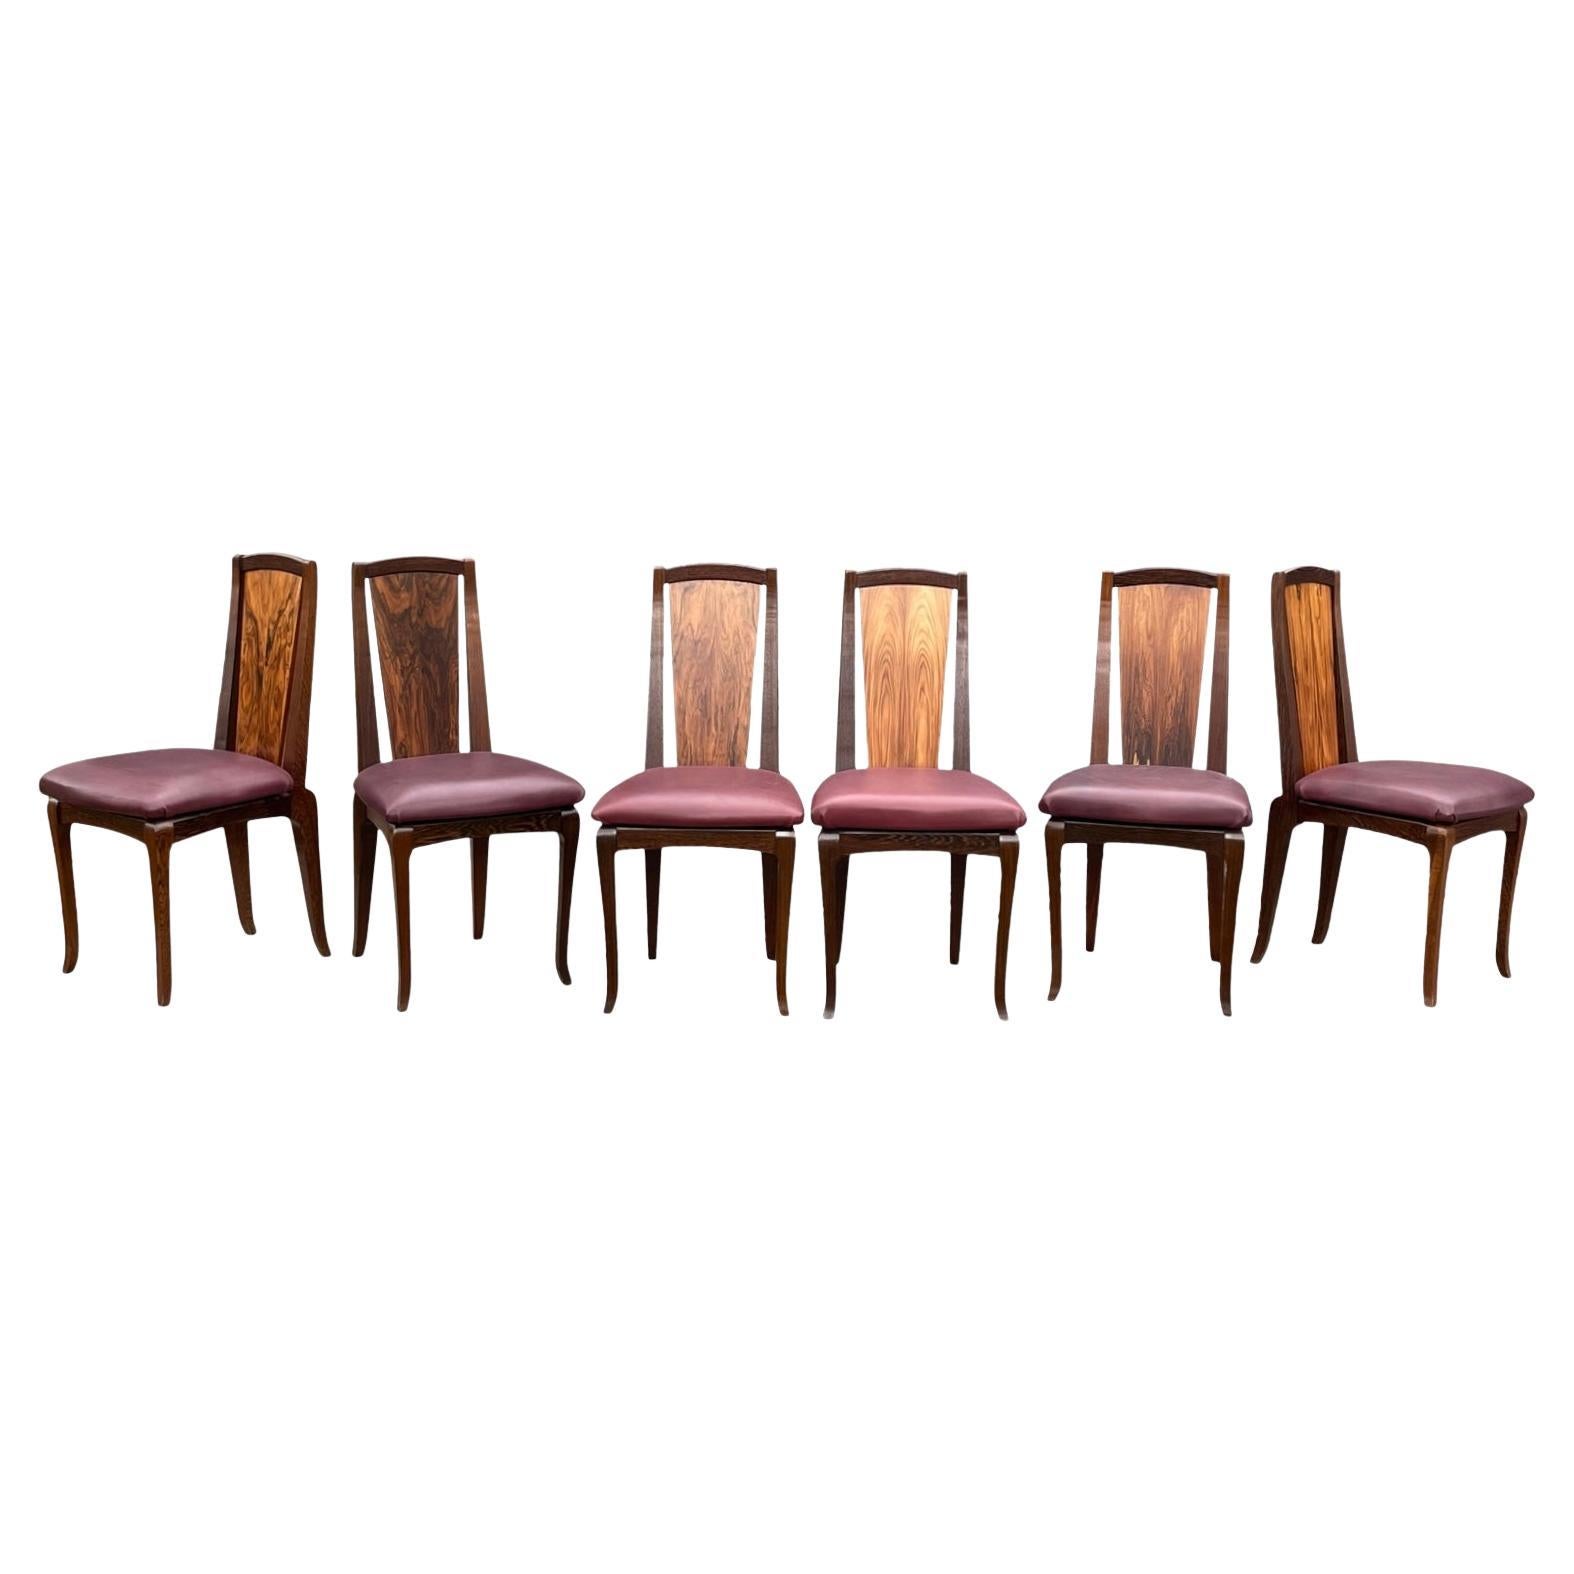 1990s Morado Rosewood & Leather Dining Chairs in the Manner of Nakashima